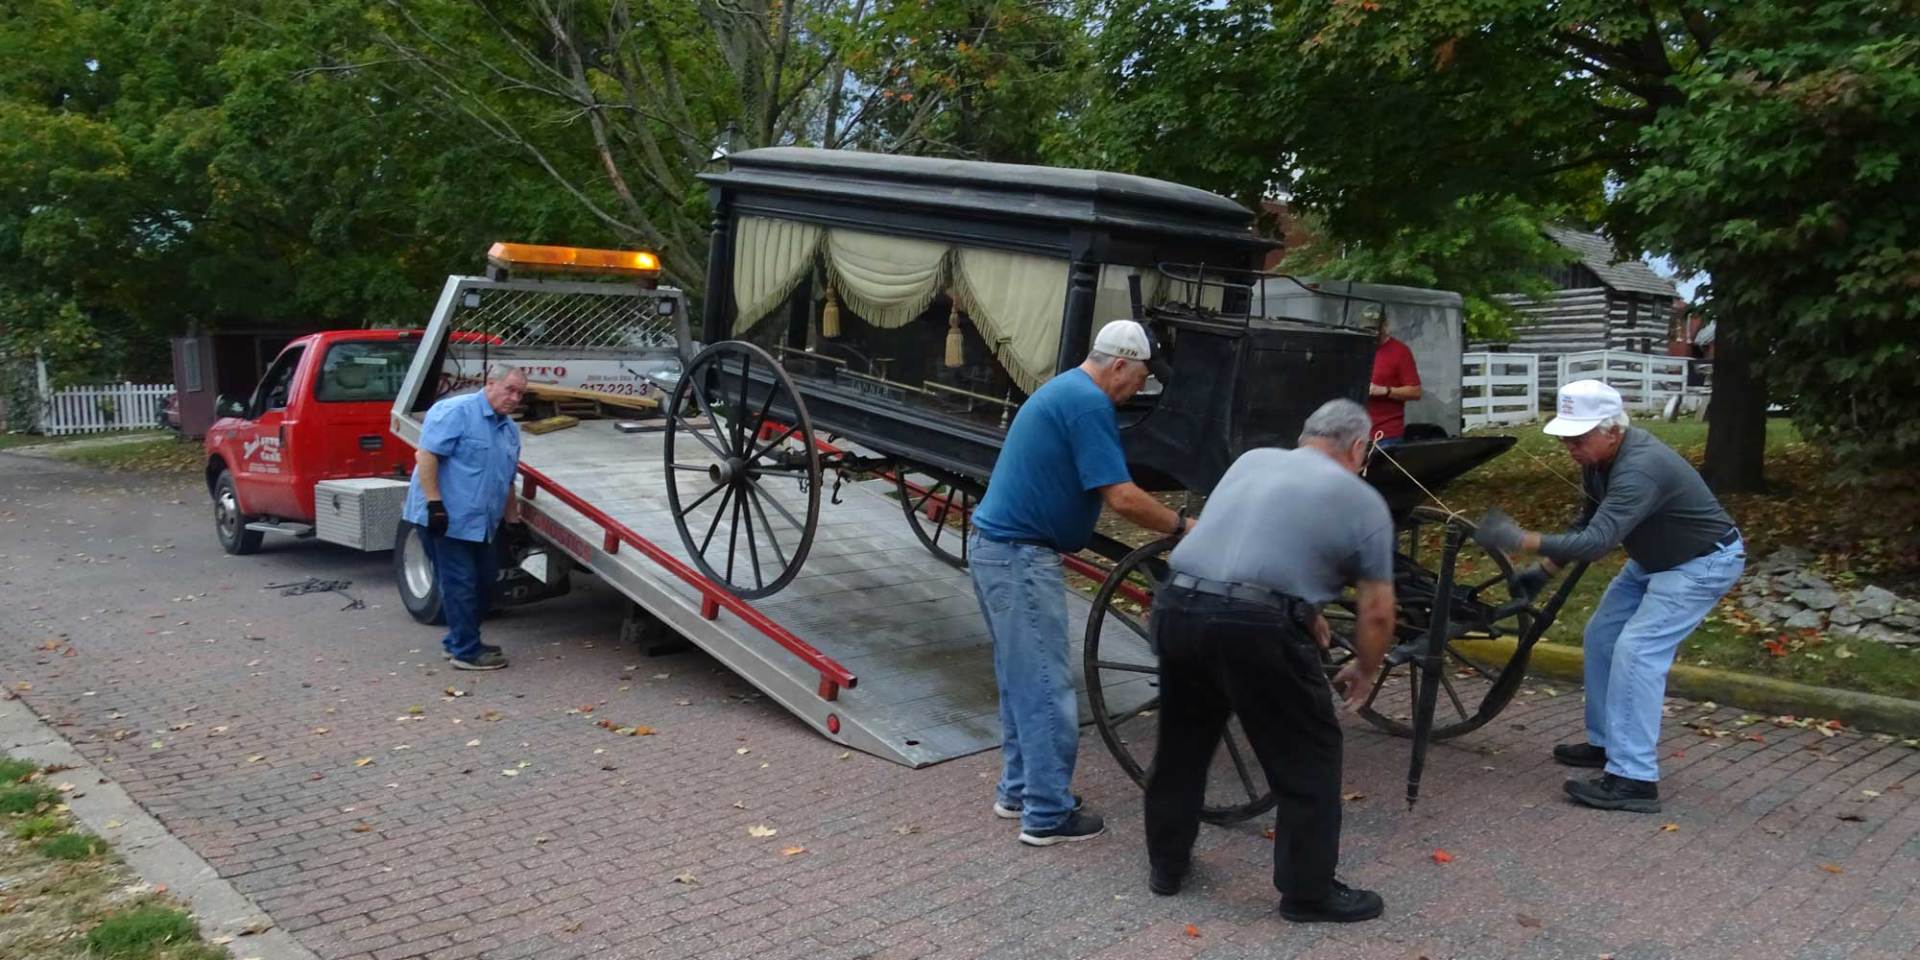 moving the hearse